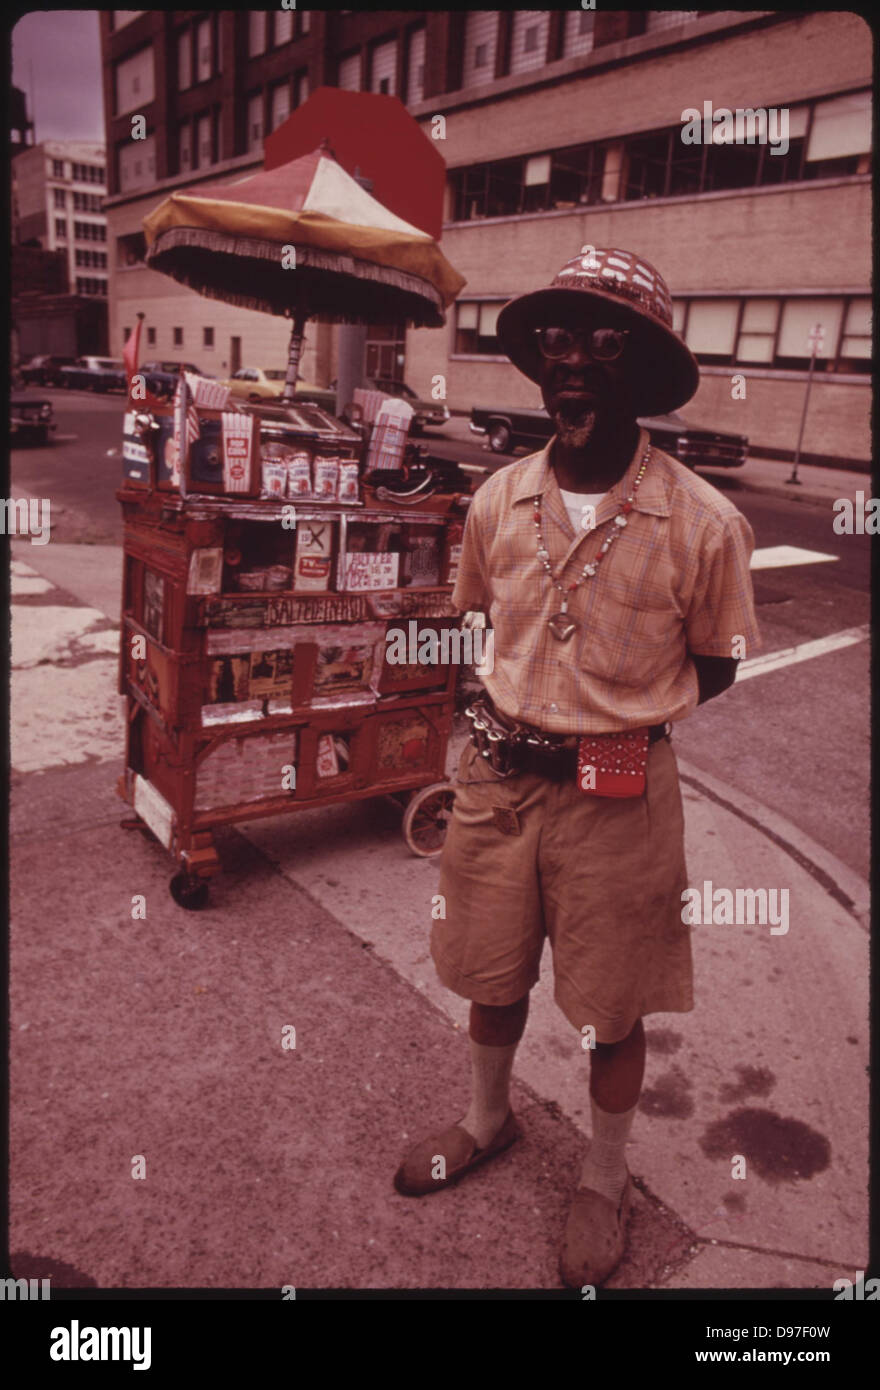 Price Allen, The Peanut Man, Who Sells His Product And Talks About The Bible To Customers On Chicago's South Side, 07/1973 Stock Photo